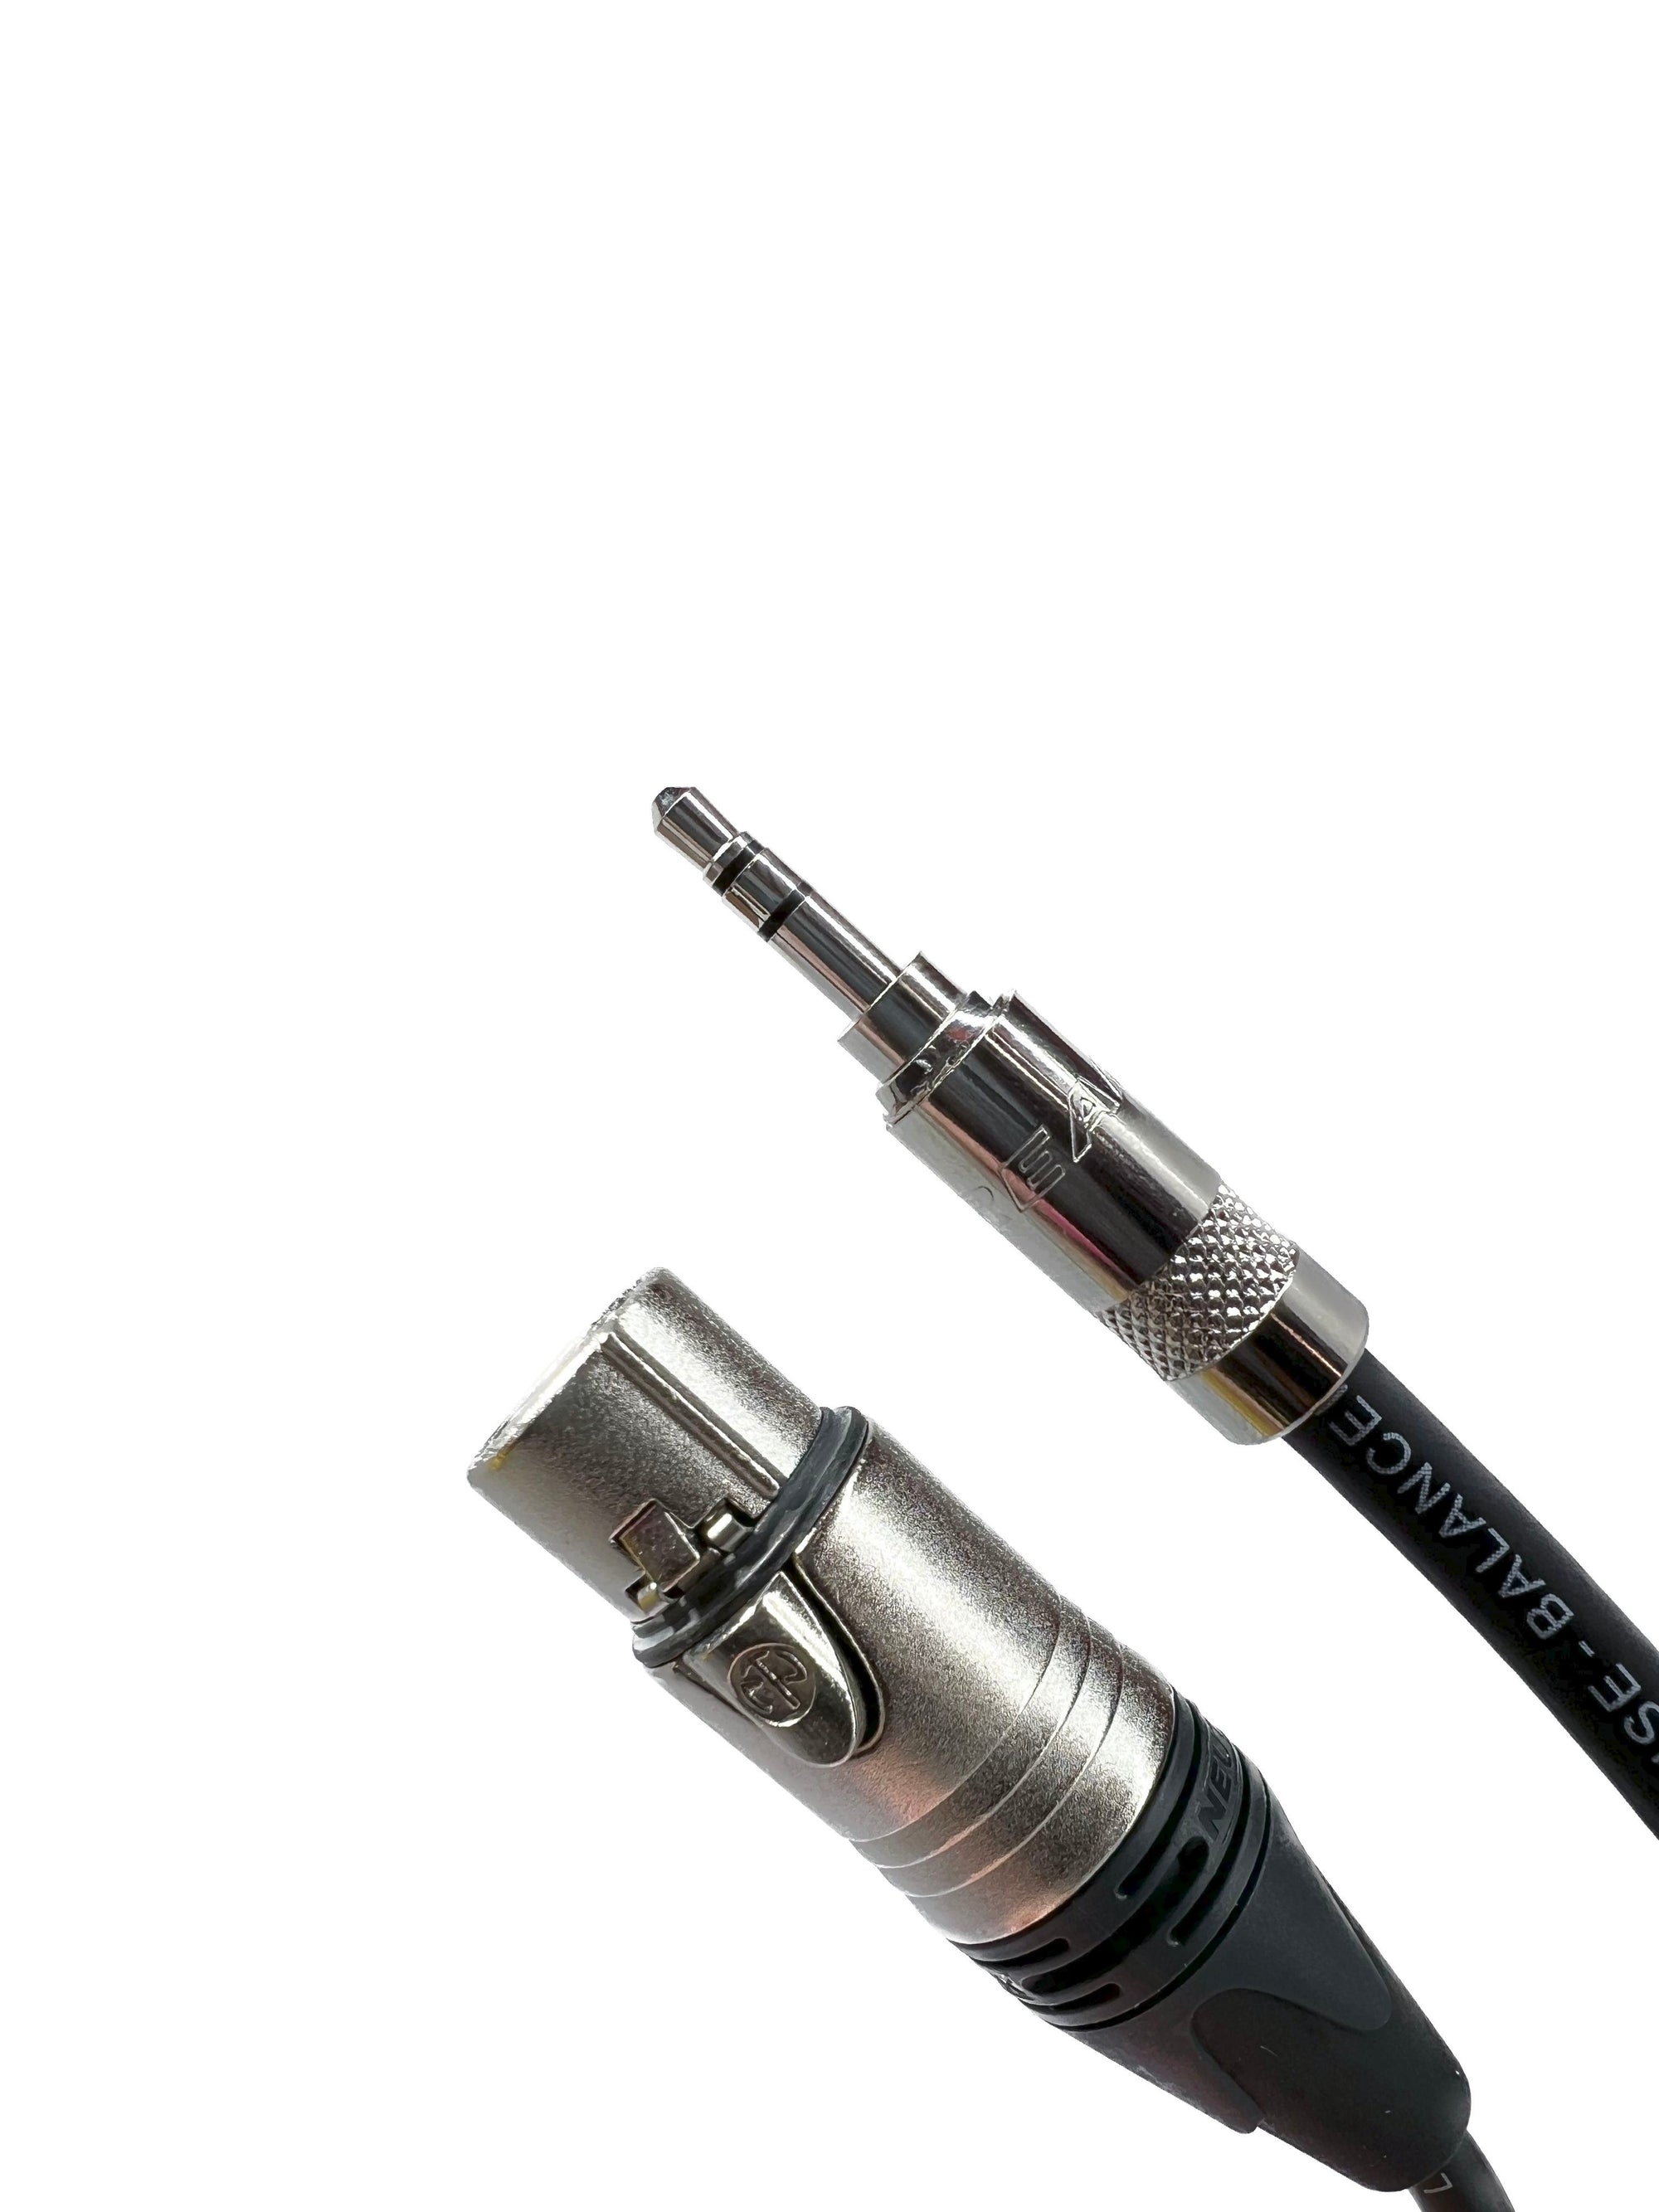 RS PRO Male 3.5mm Stereo Jack to Male RCA x 2 Aux Cable, Black